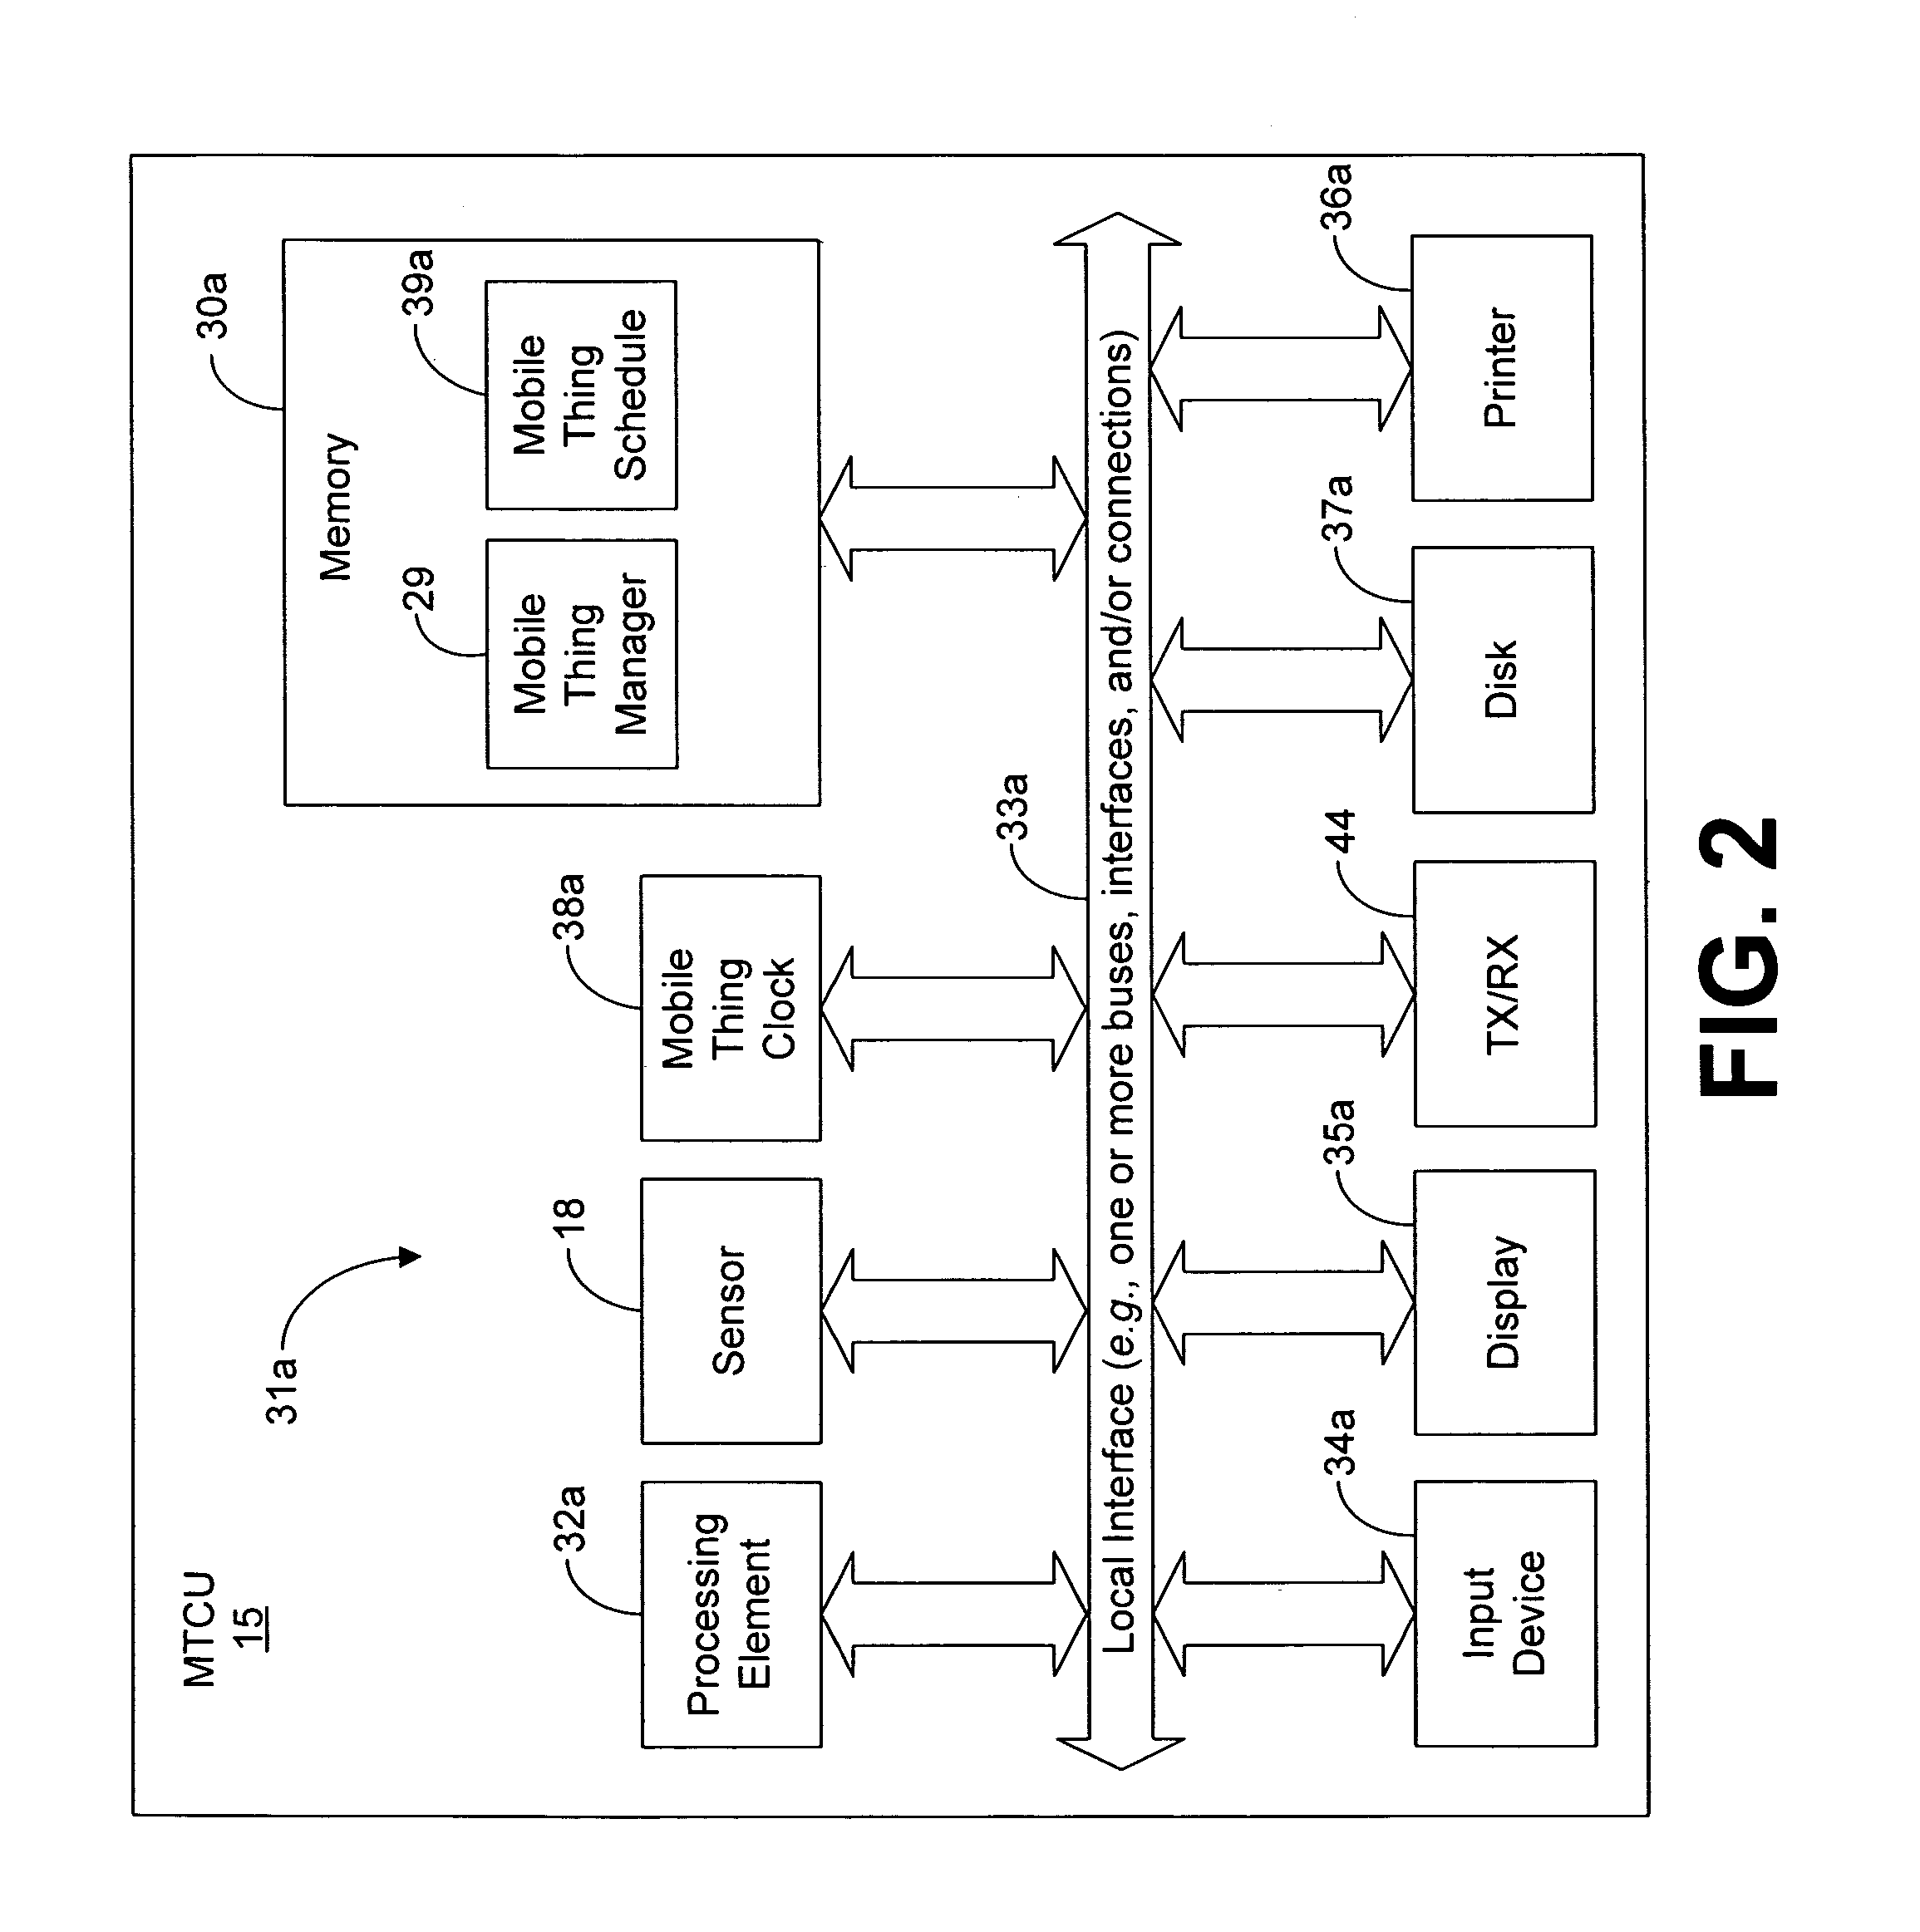 Notification systems and methods enabling a response to change particulars of delivery or pickup